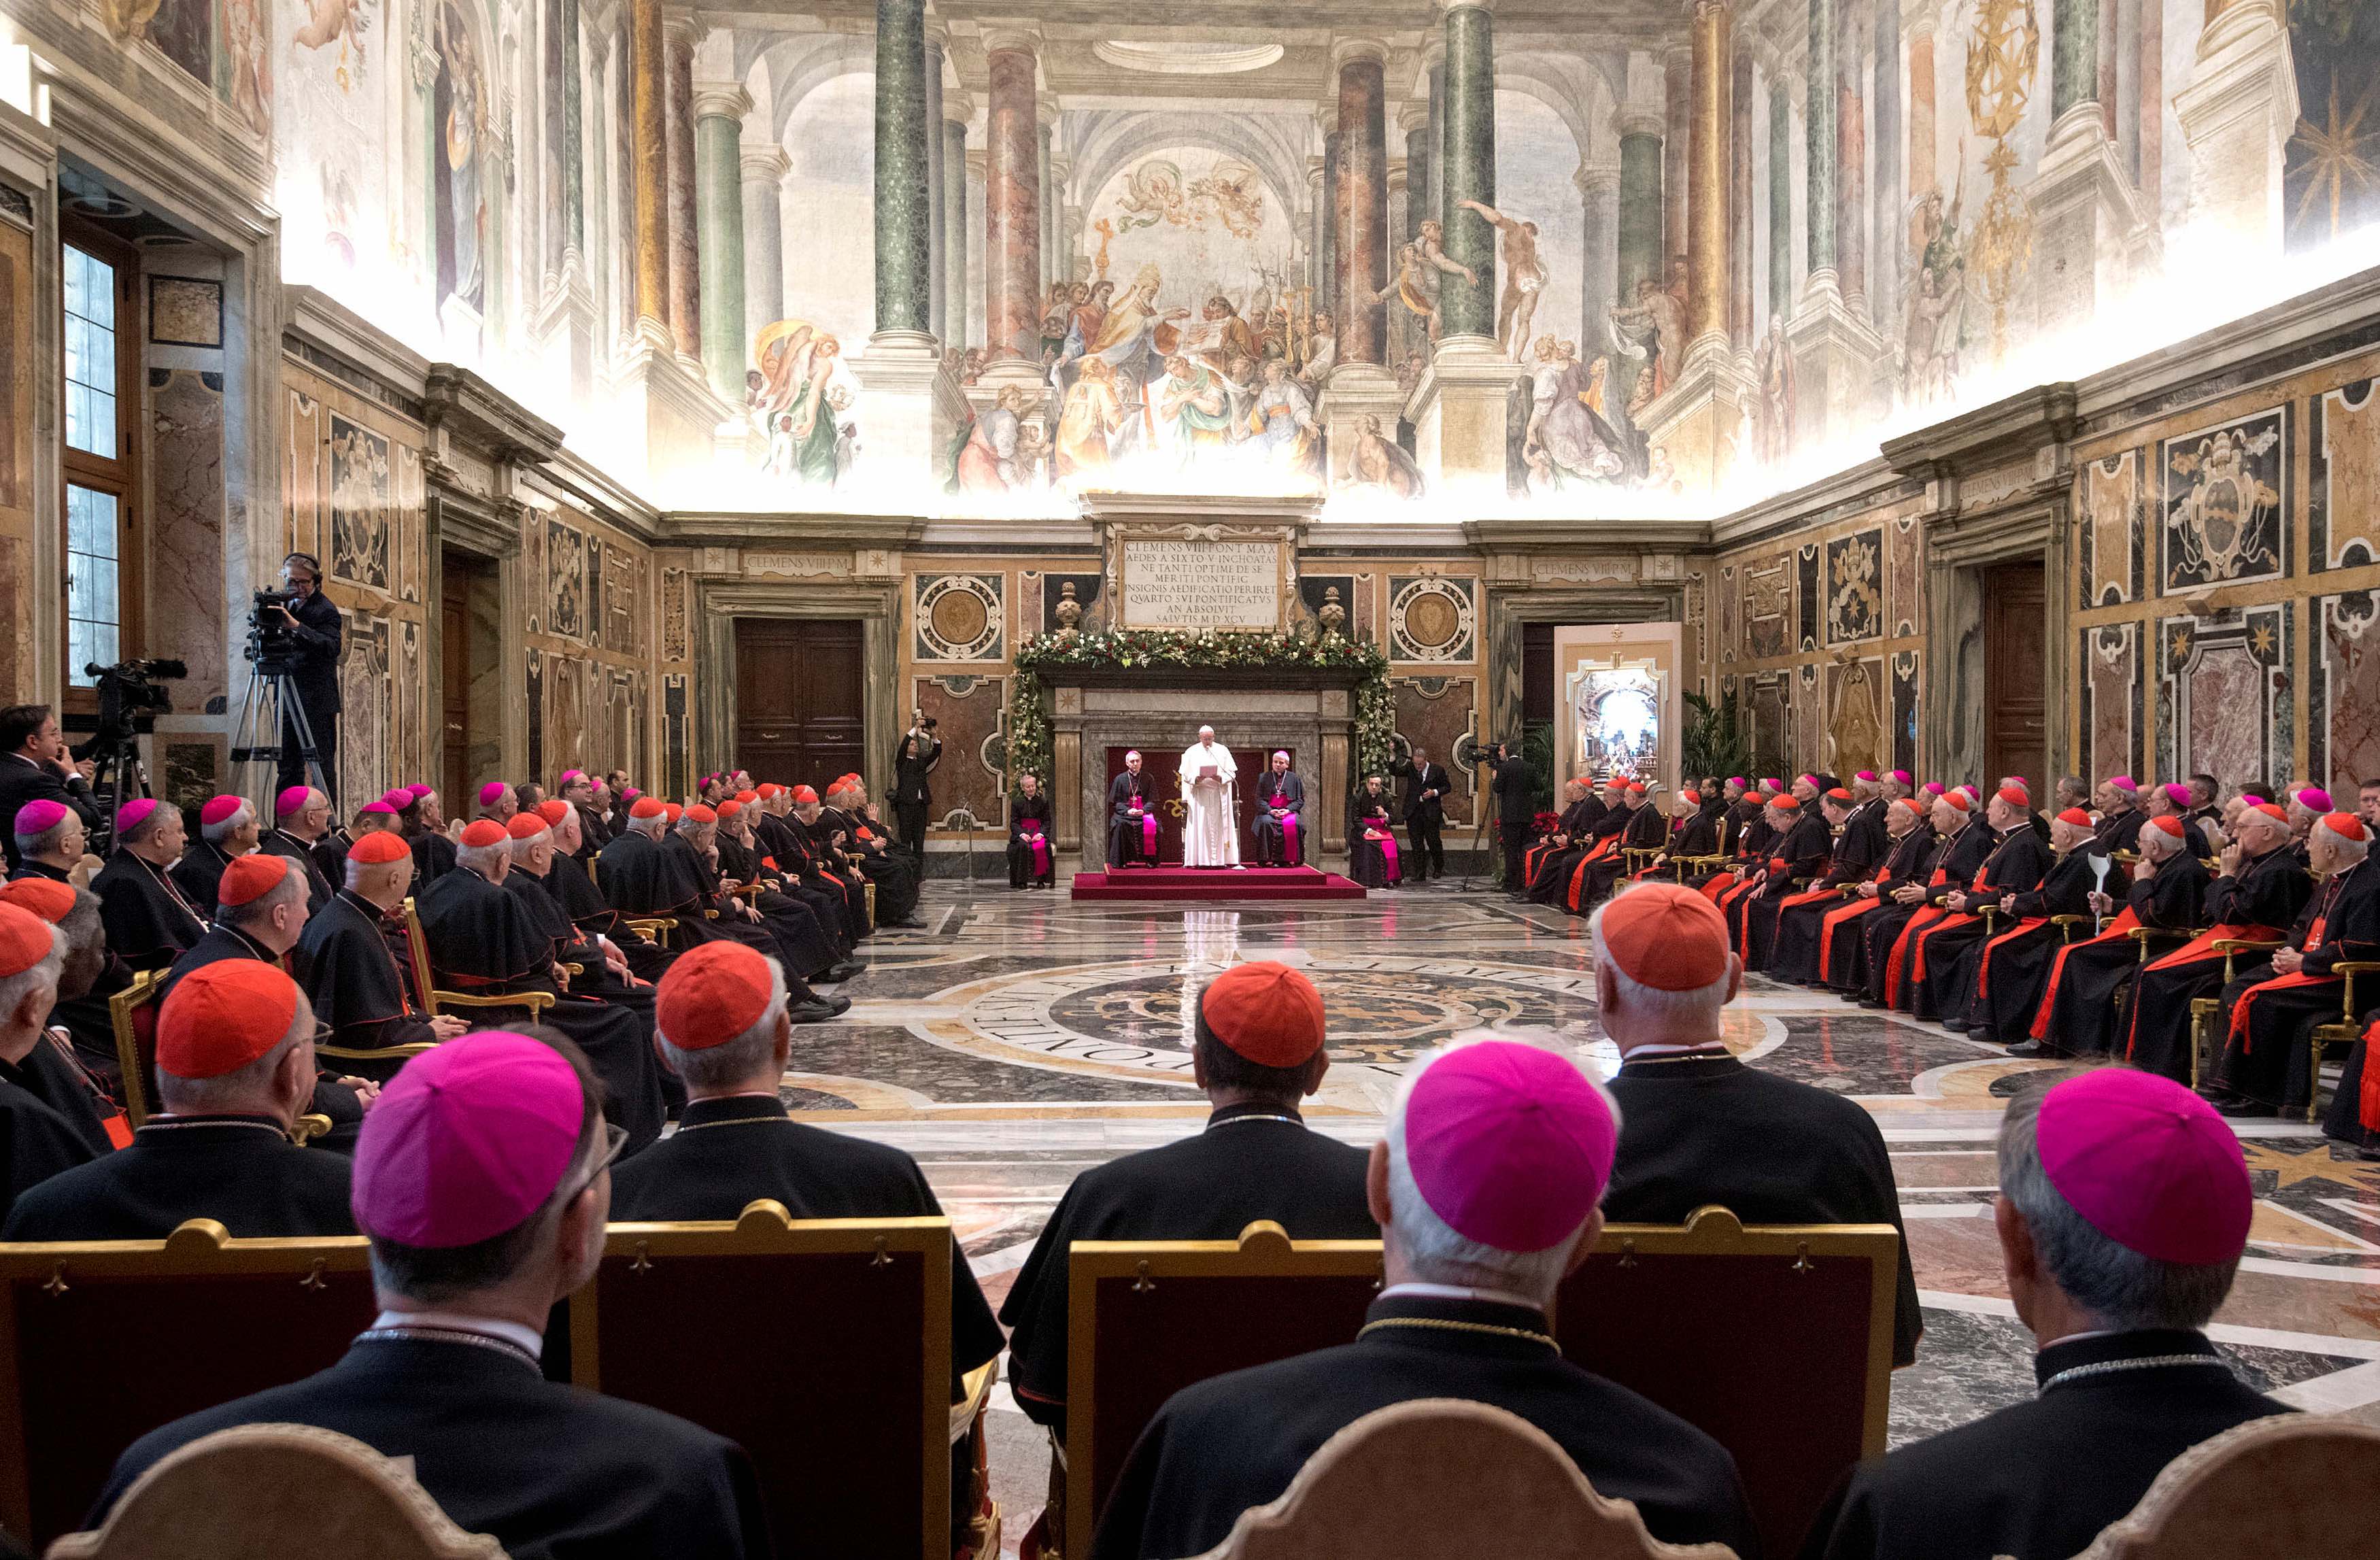 Church will spare no effort to end abuse, pope tells Curia